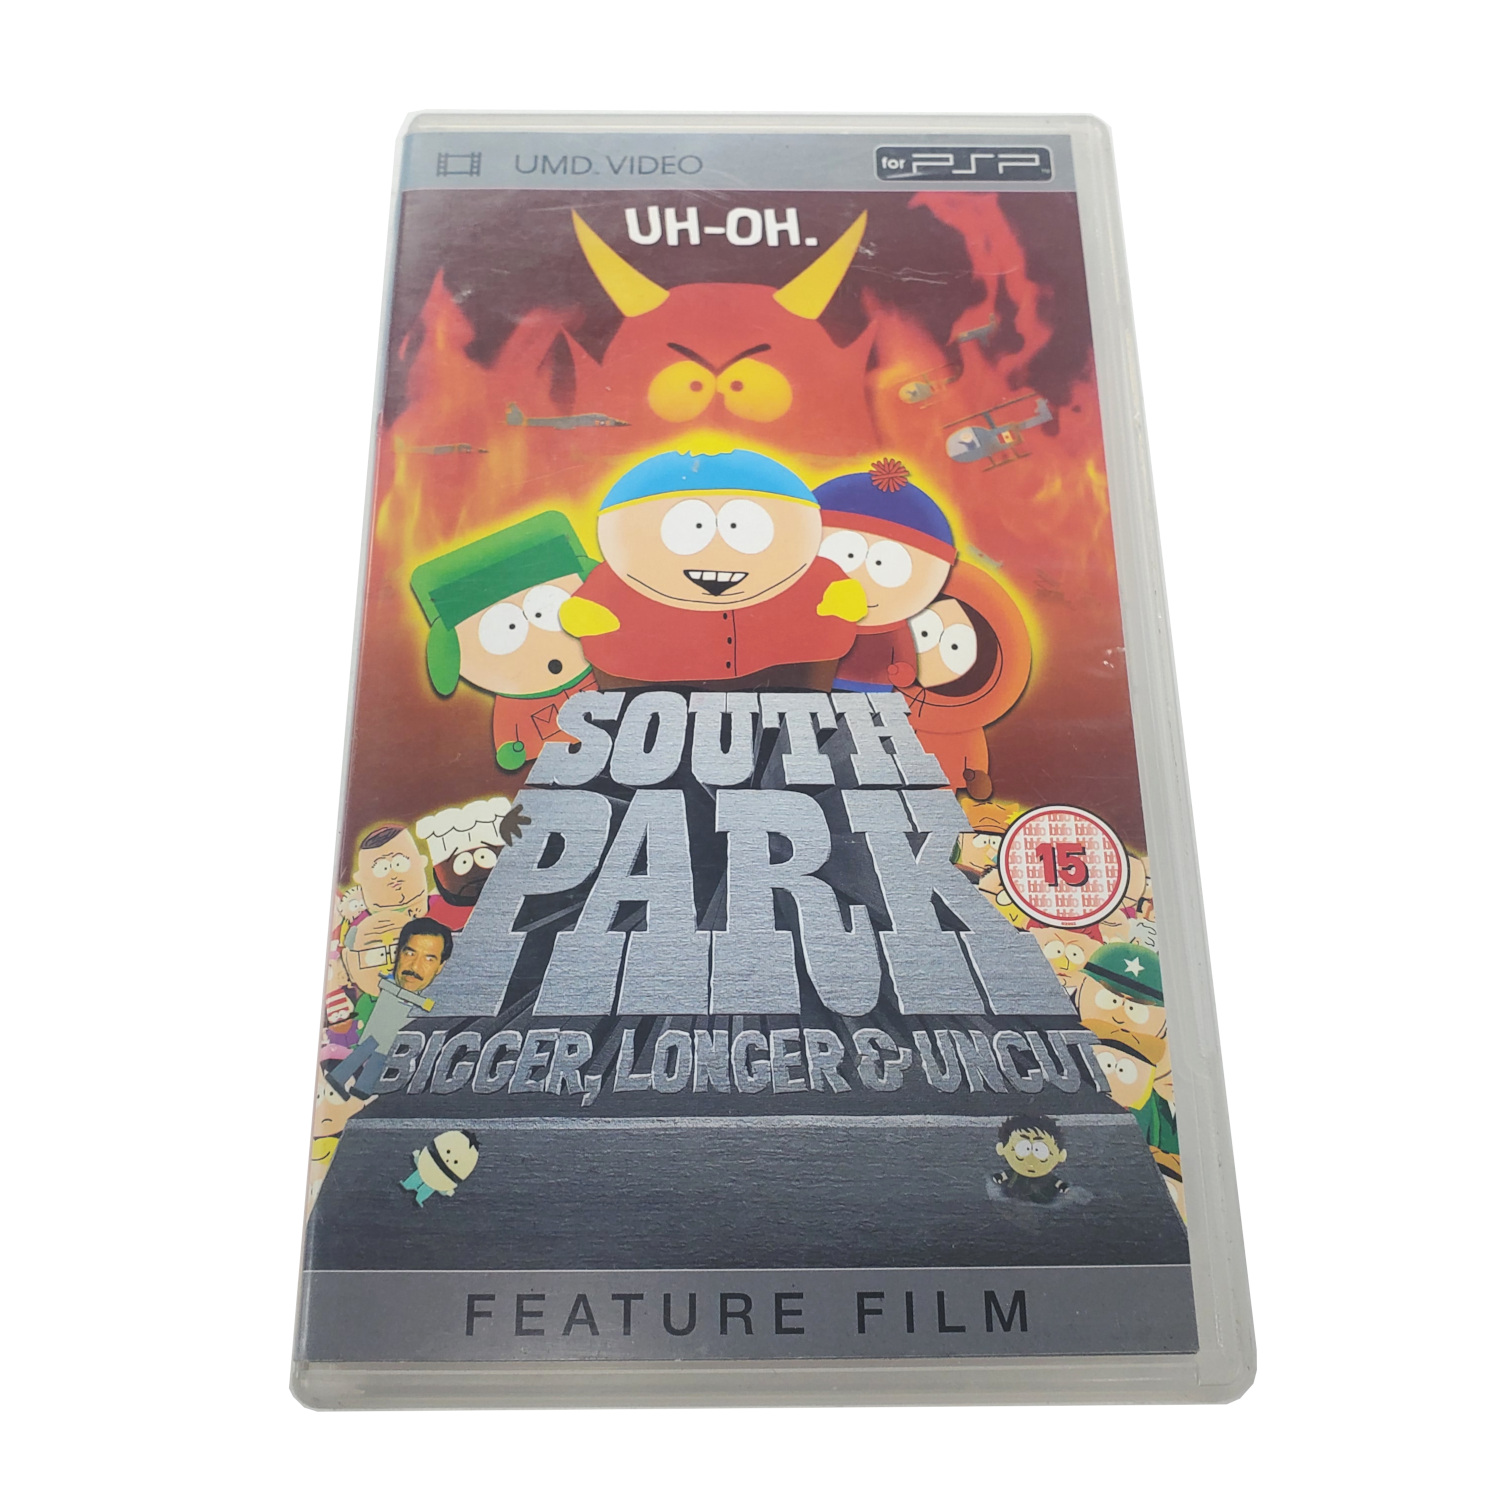 South Park: Bigger, Longer & Uncut UMD - Unfiltered Animated Madness!